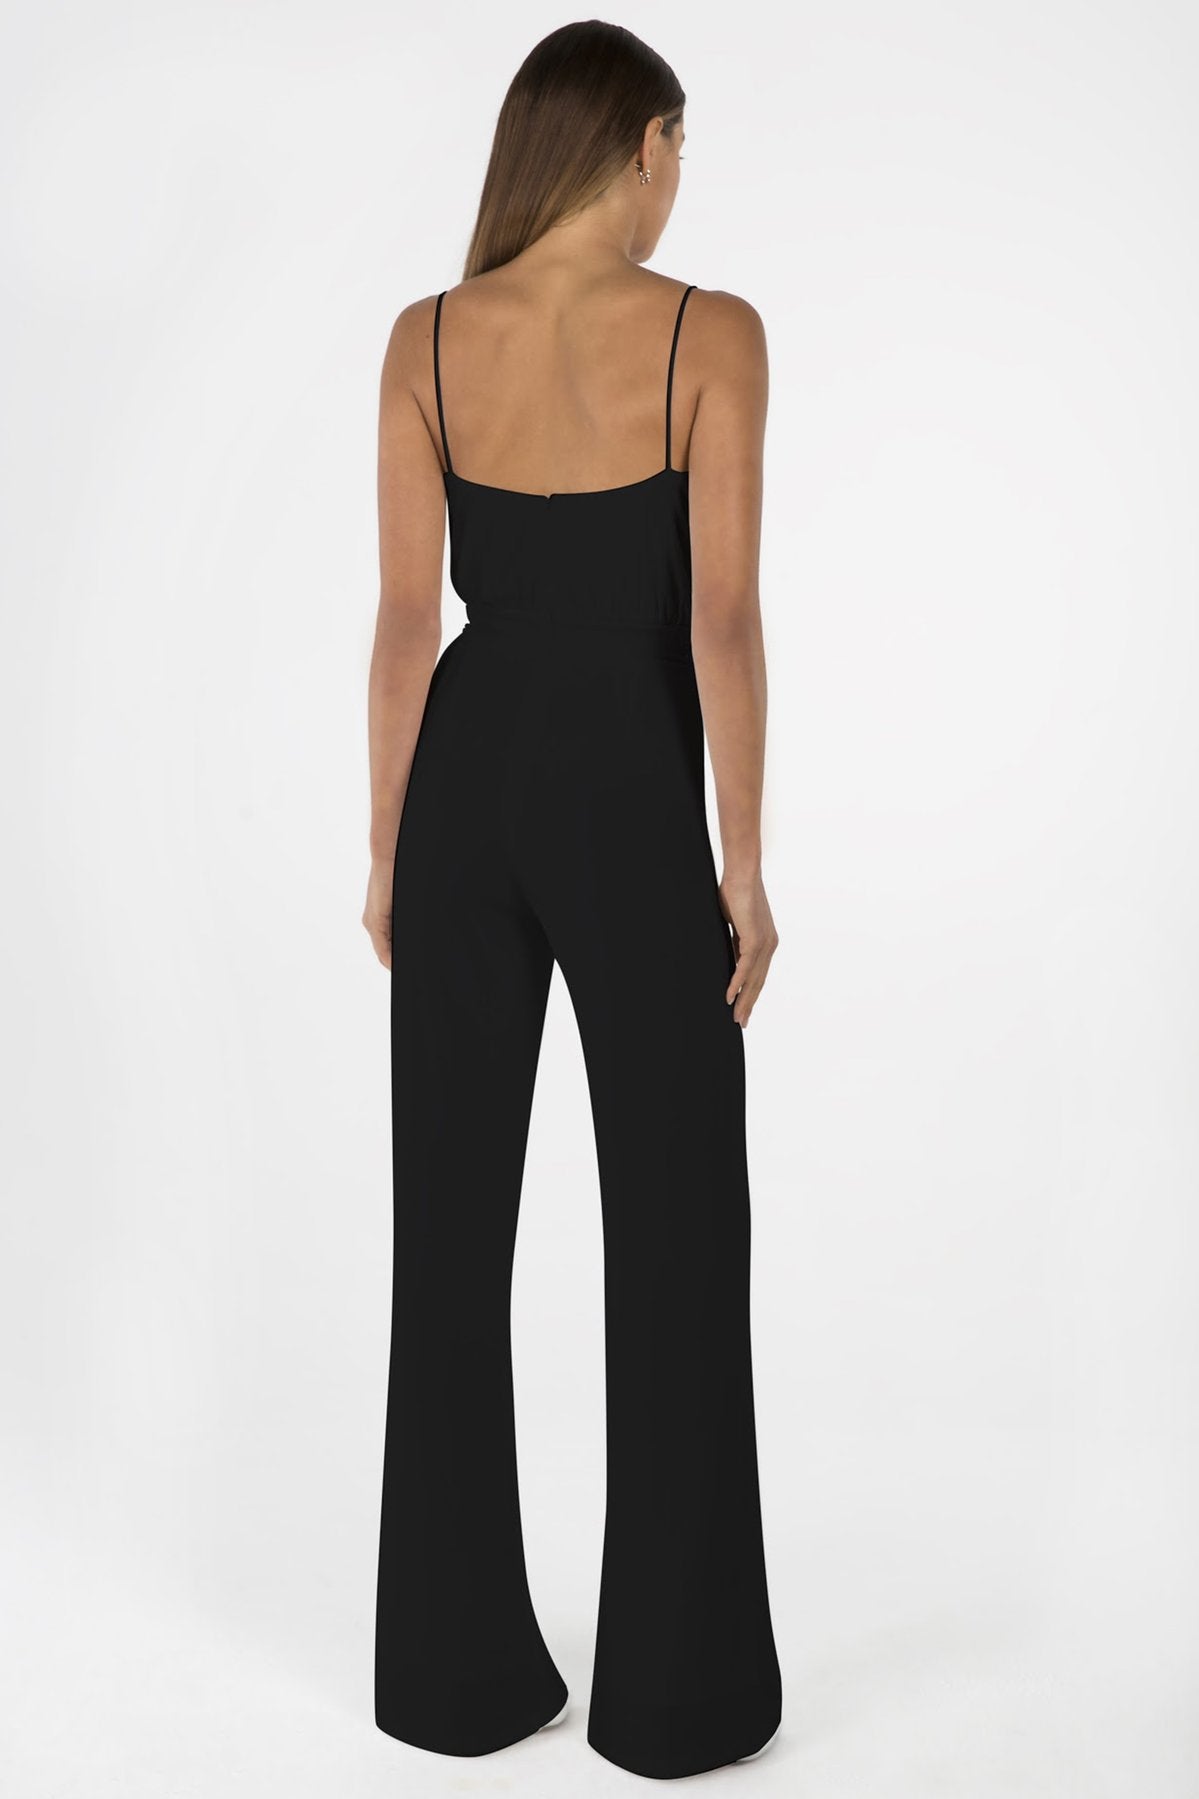 Moyra Pantsuit in Black - Misha Collection